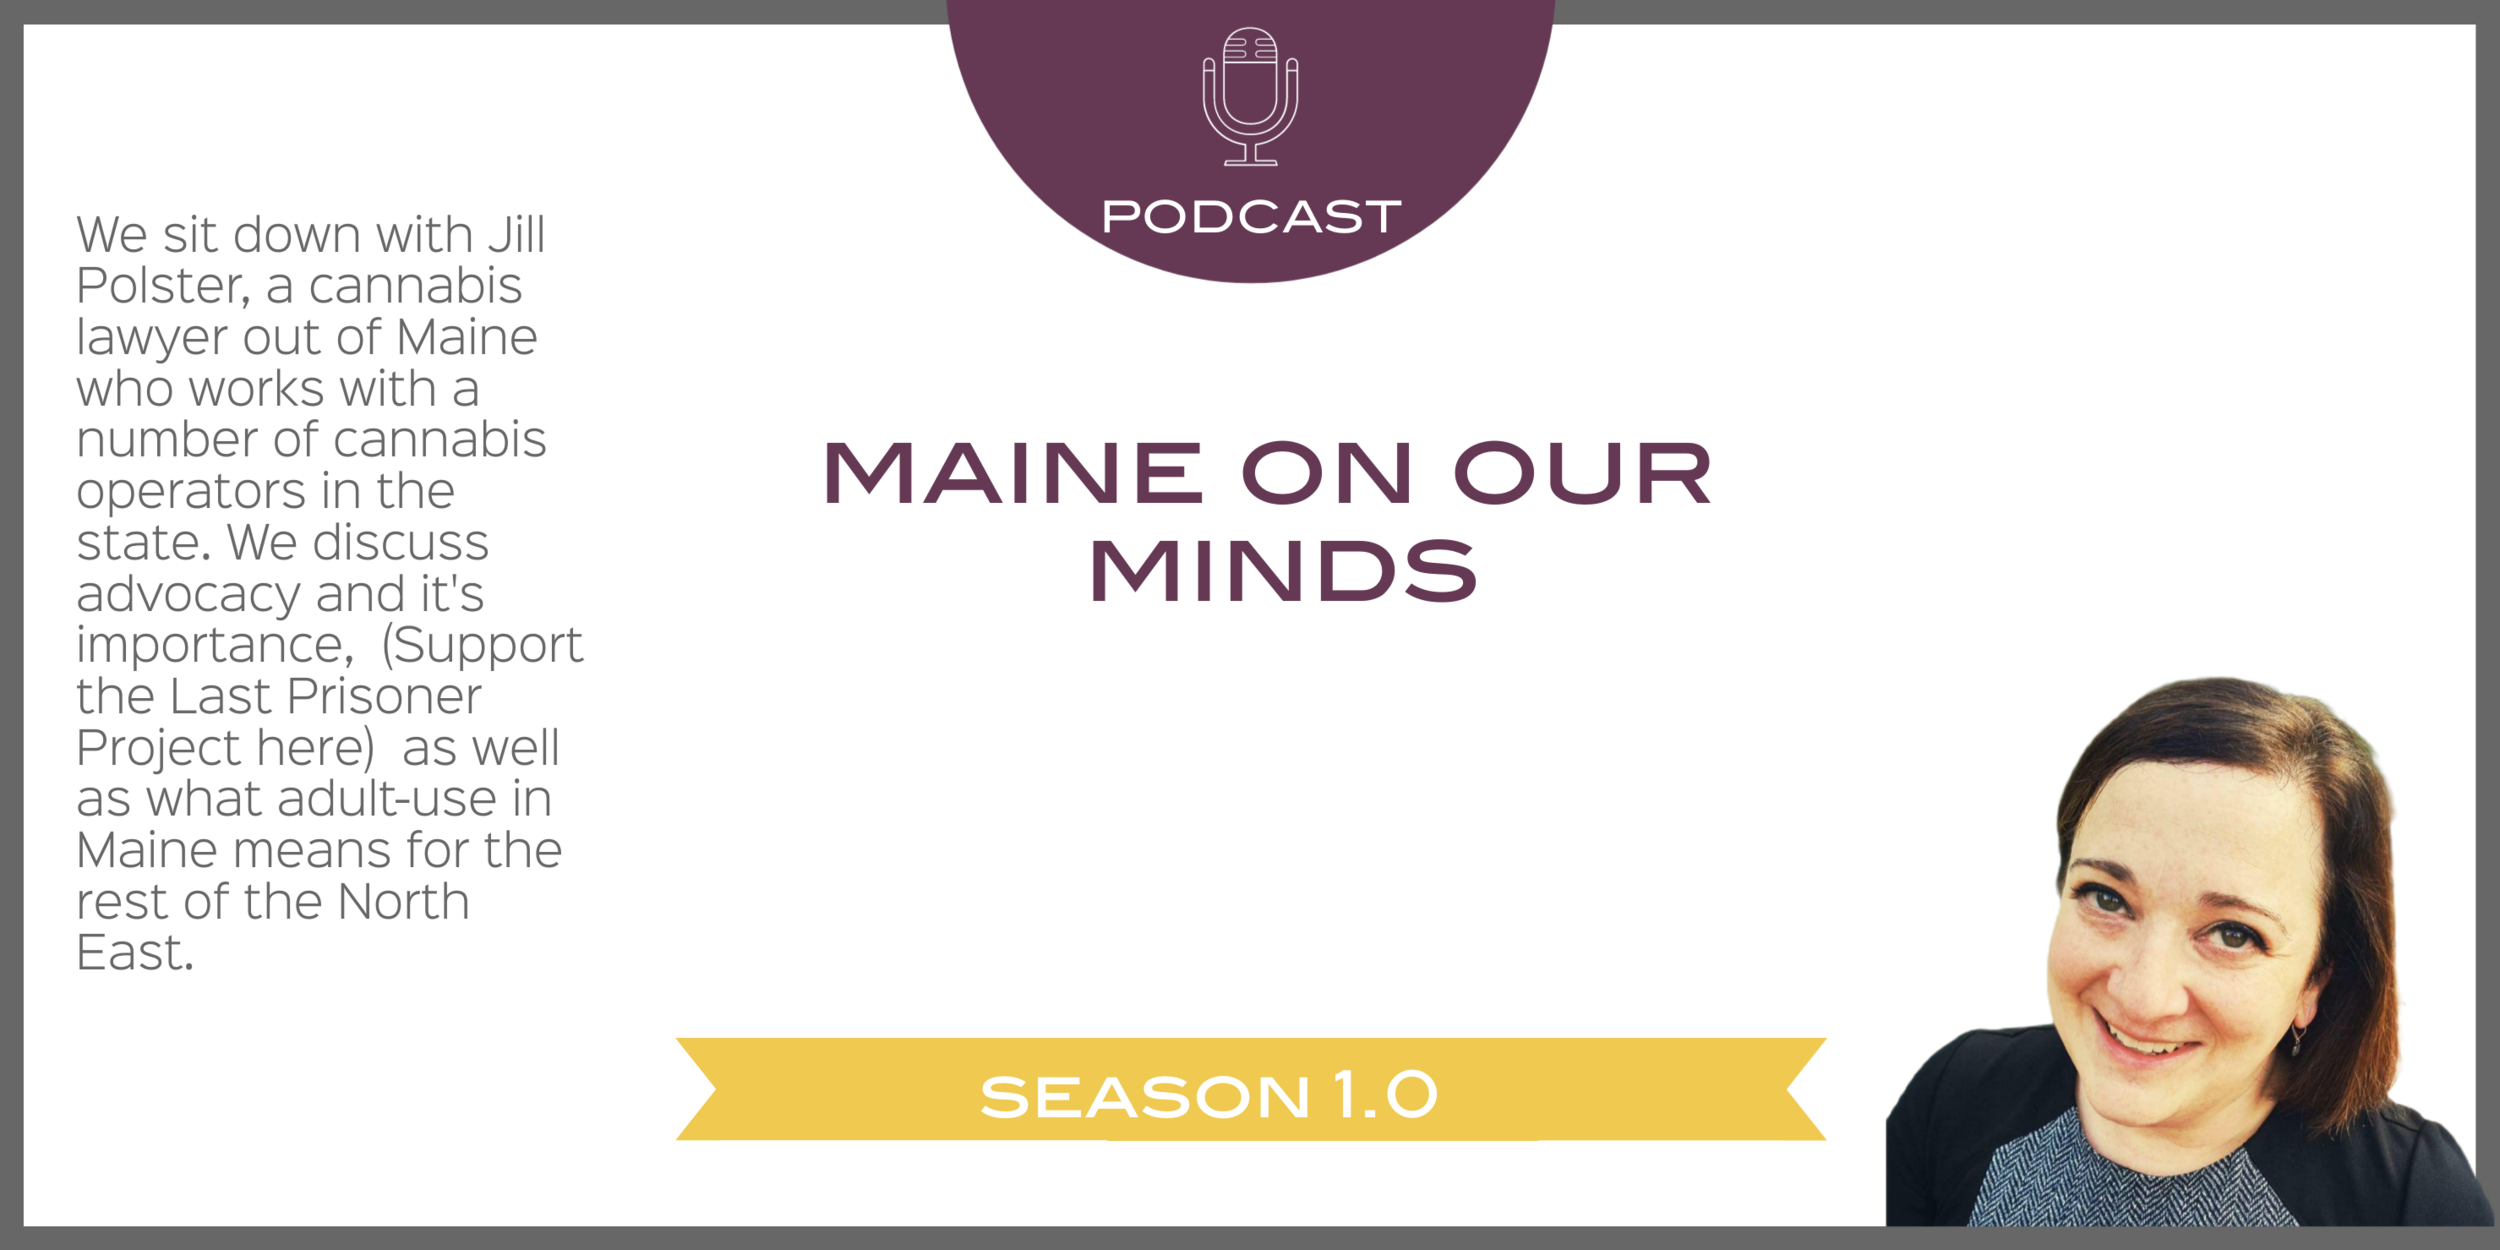 Jill Polster from Cohen Law Maine talks advocacy and the Maine market